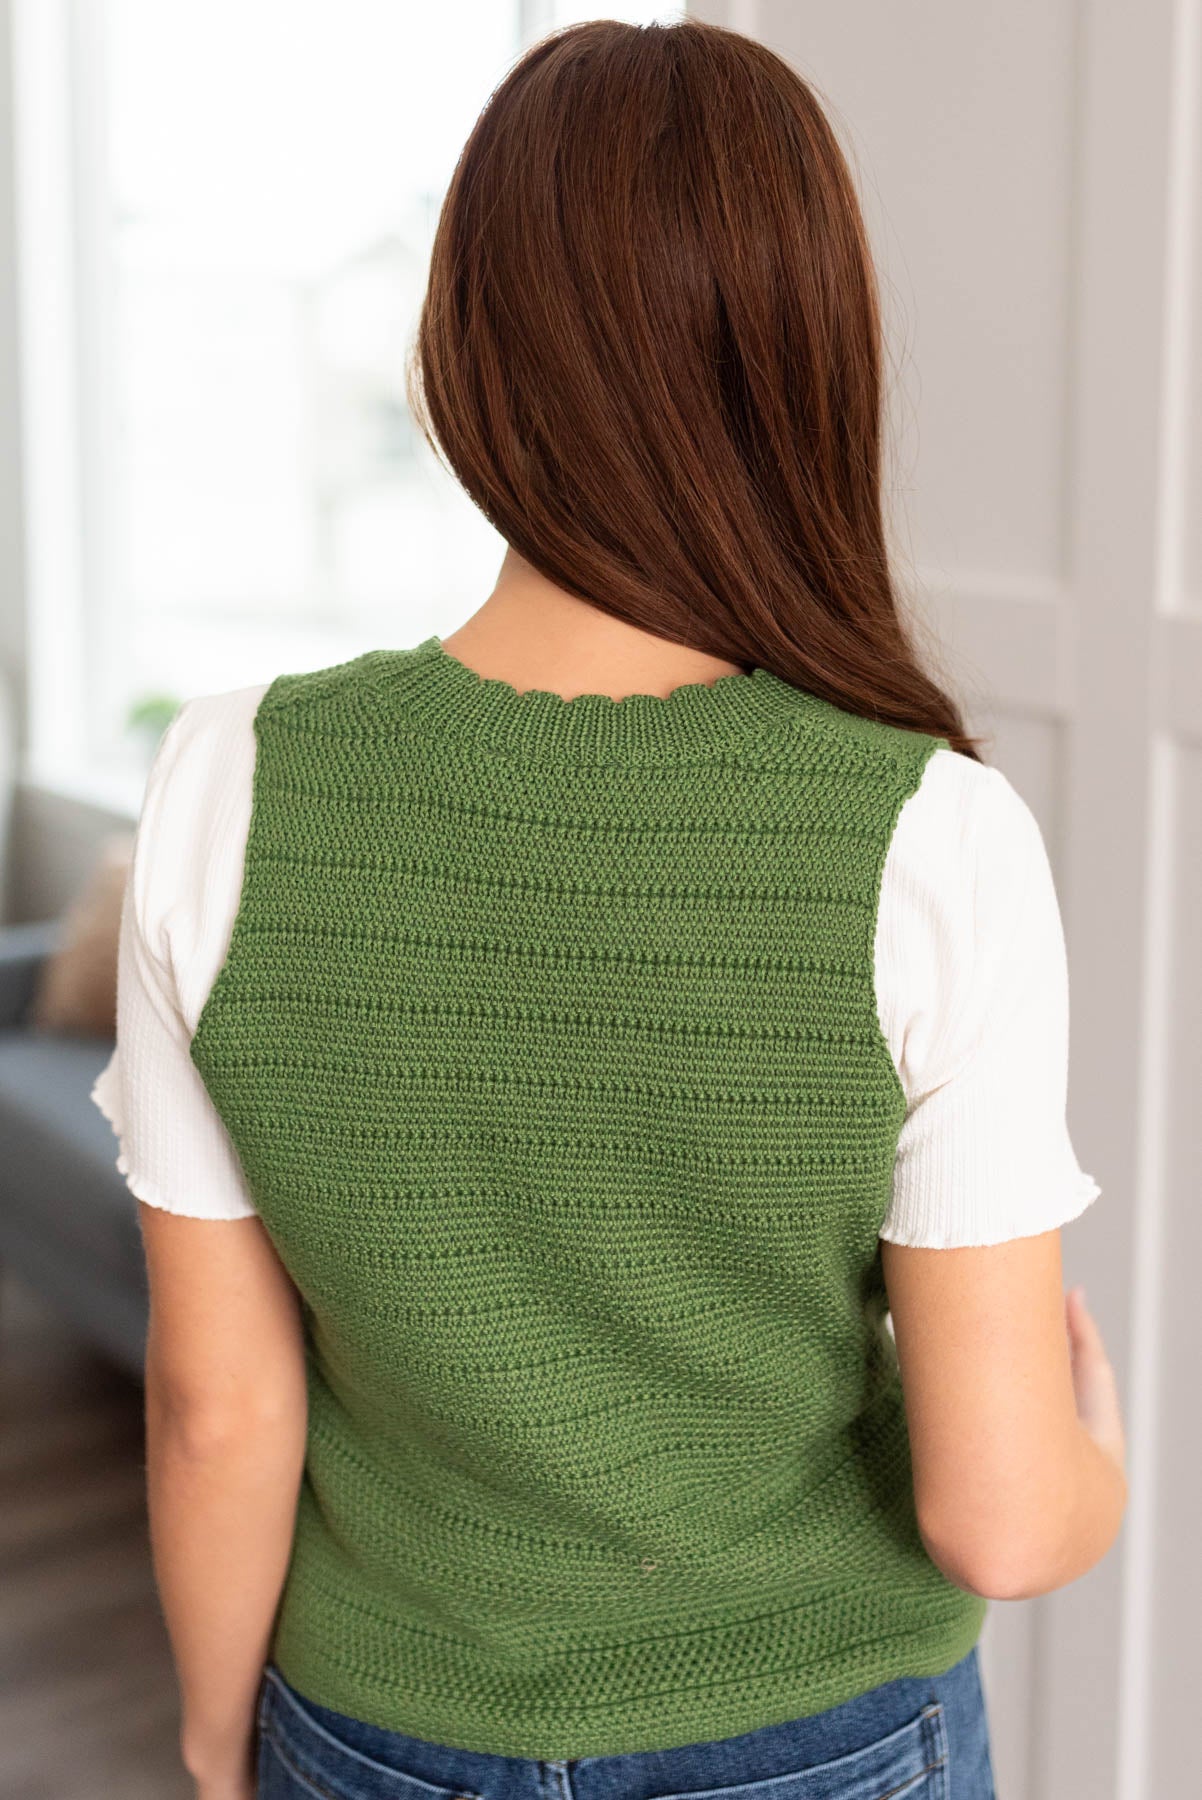 Back view of the green knitted sweater